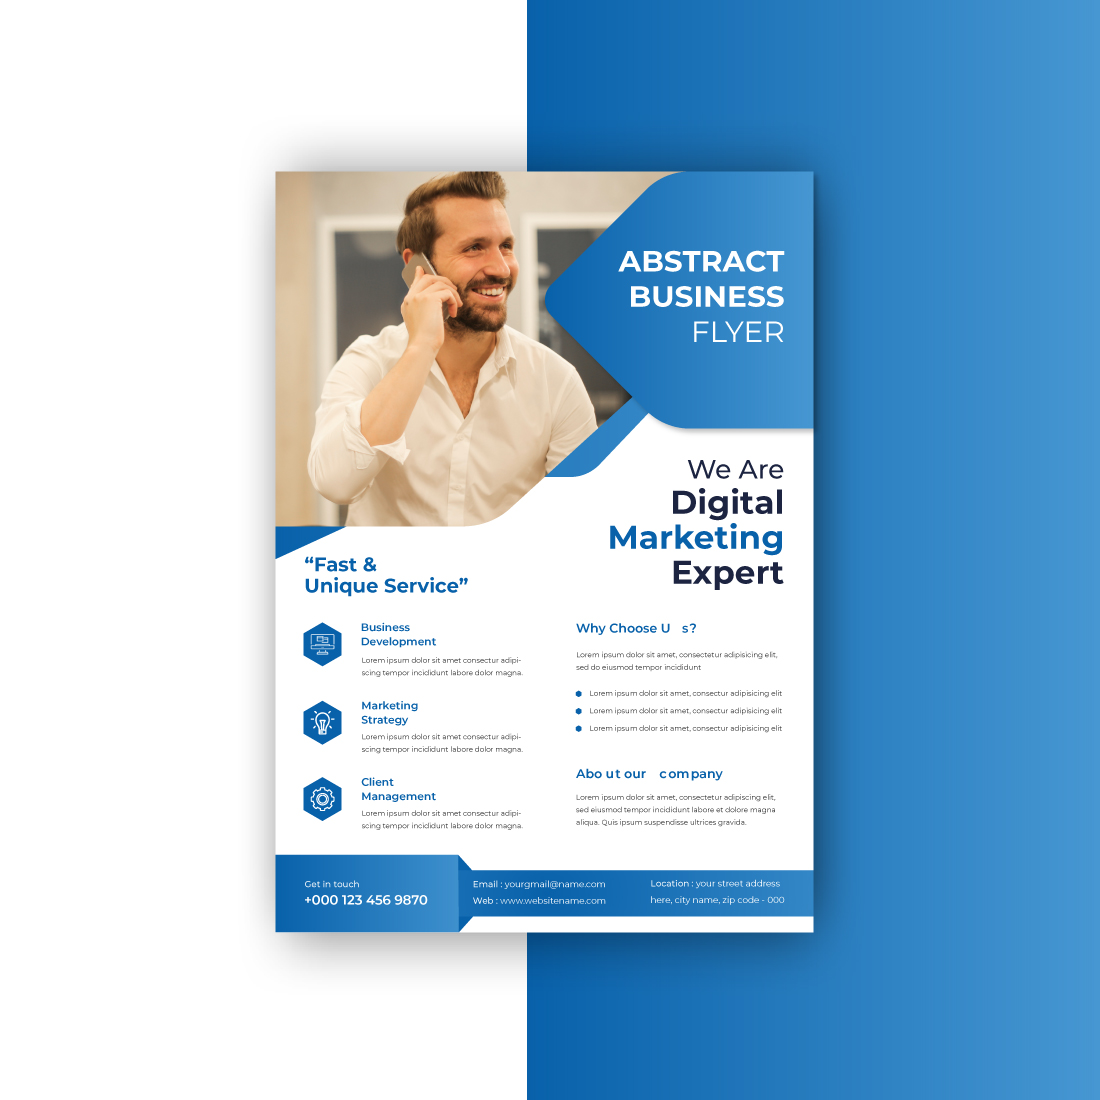 Blue and white flyer for a digital marketing expert.